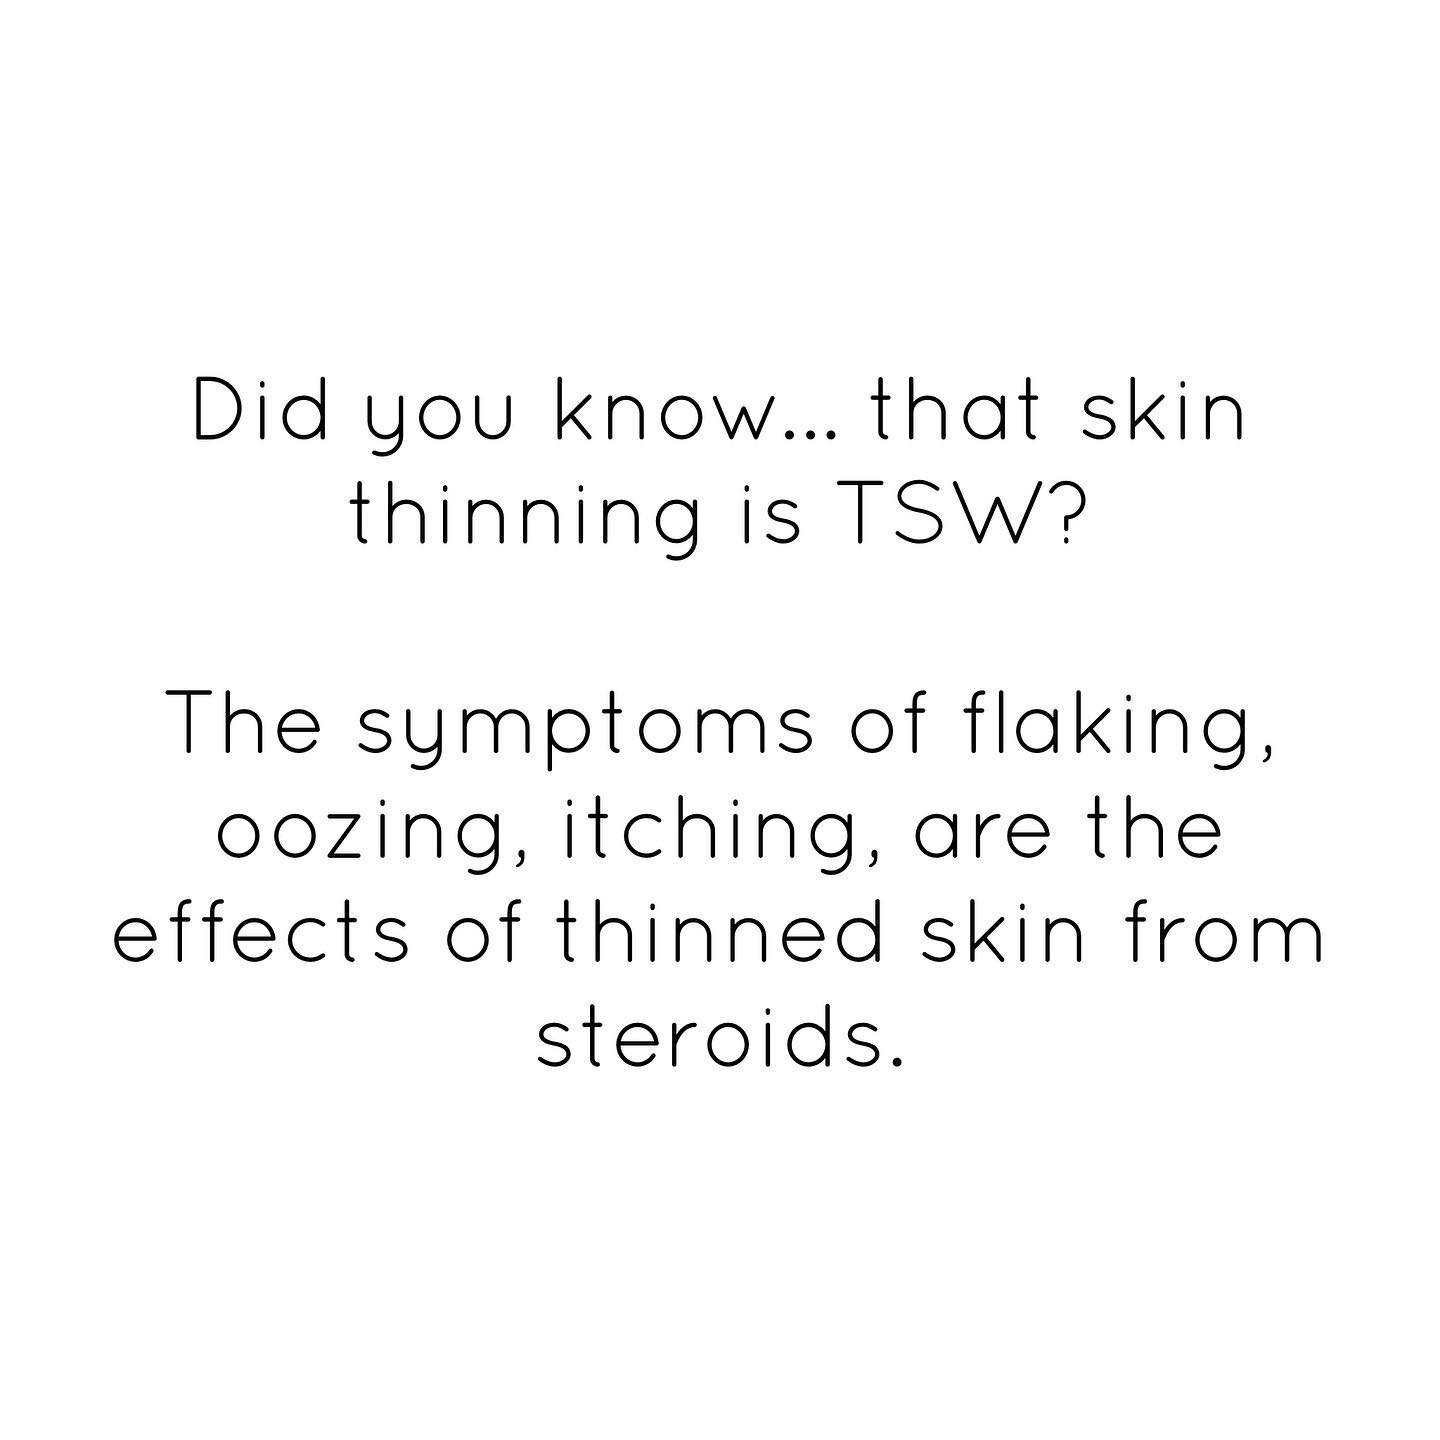 Think there is some confusion of what skin thinning actually is. Hope this information helps in understanding what TSW and thinned skin means!